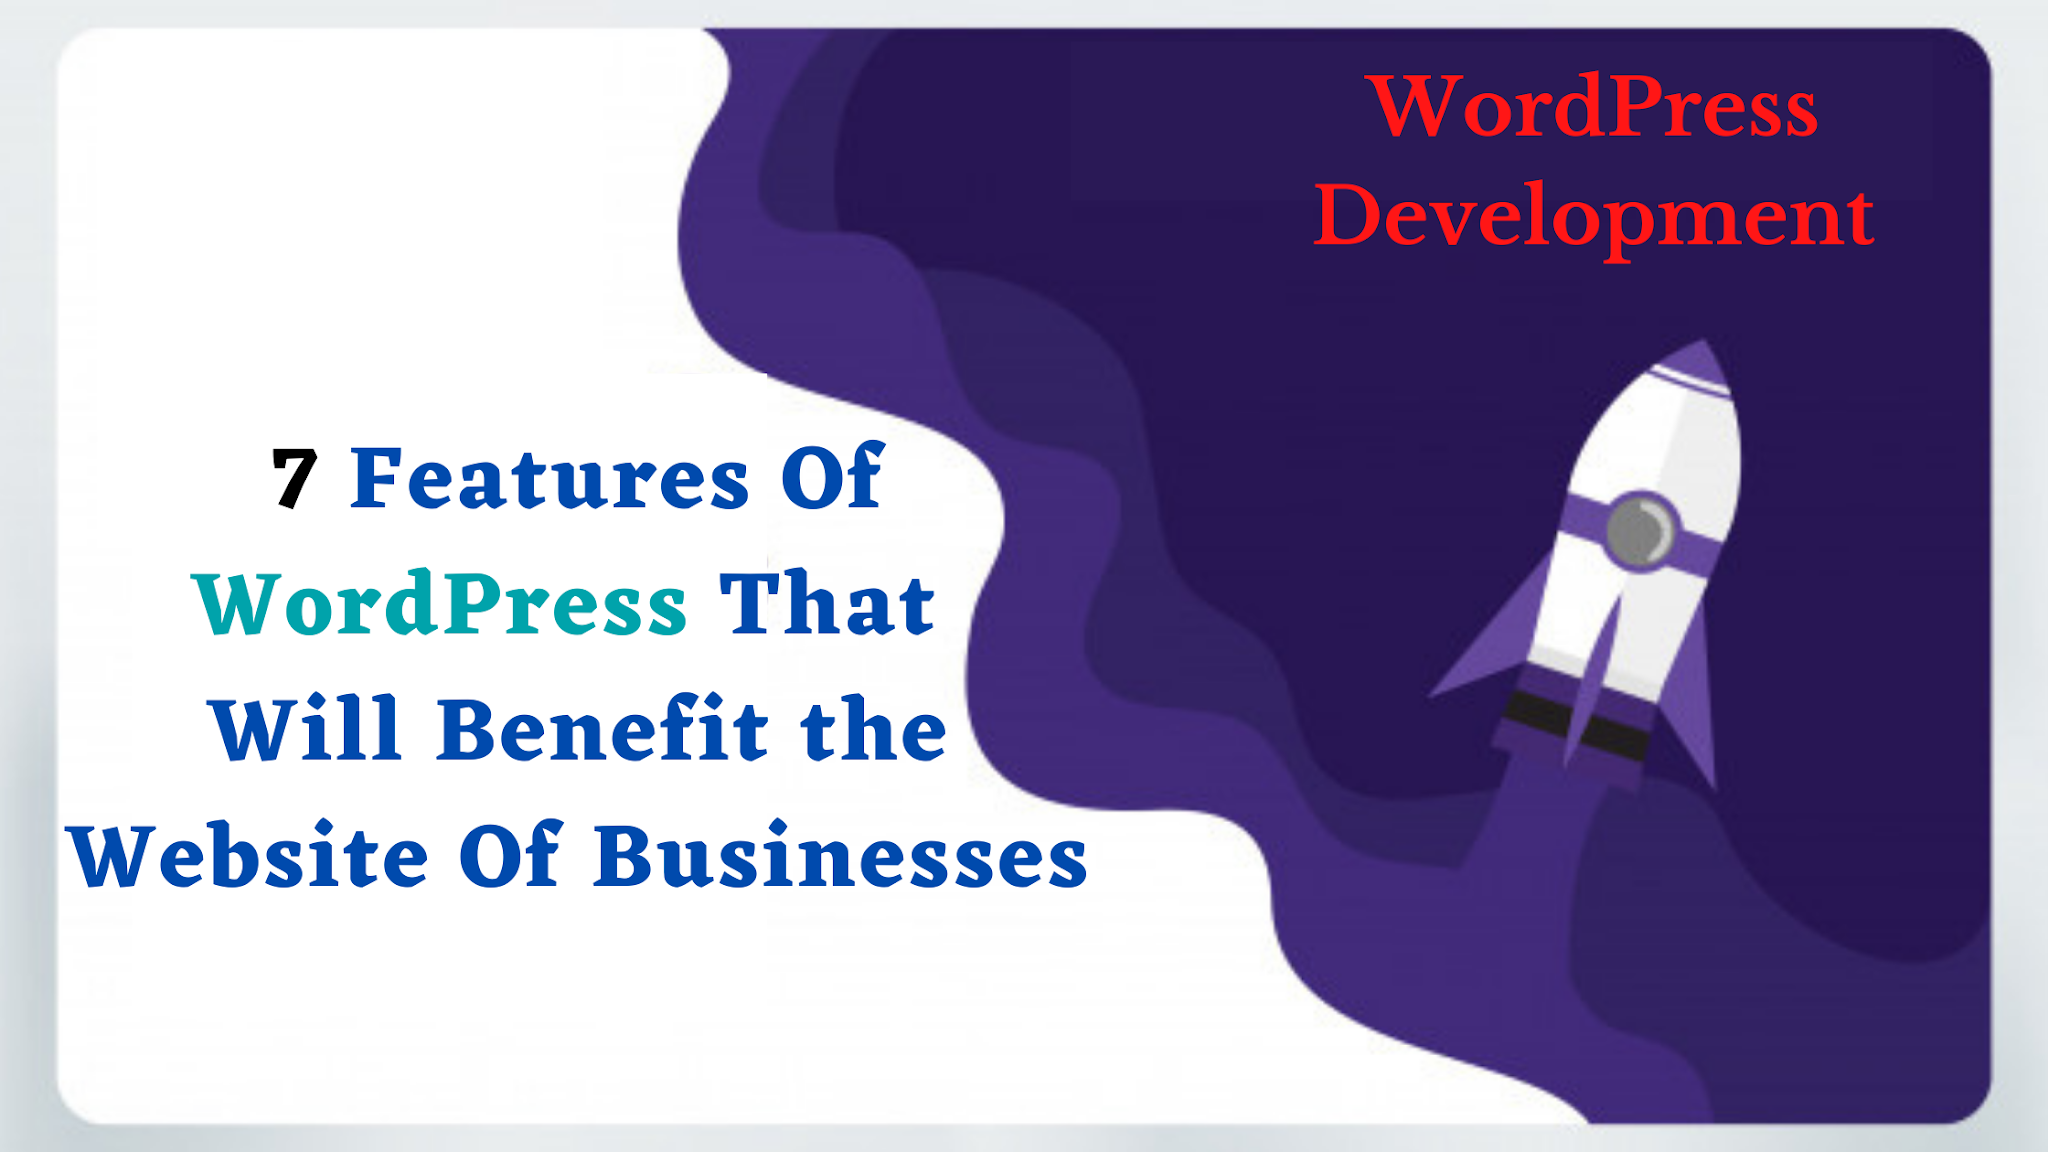 7 Features Of WordPress That Will Benefit the Website Of Businesses